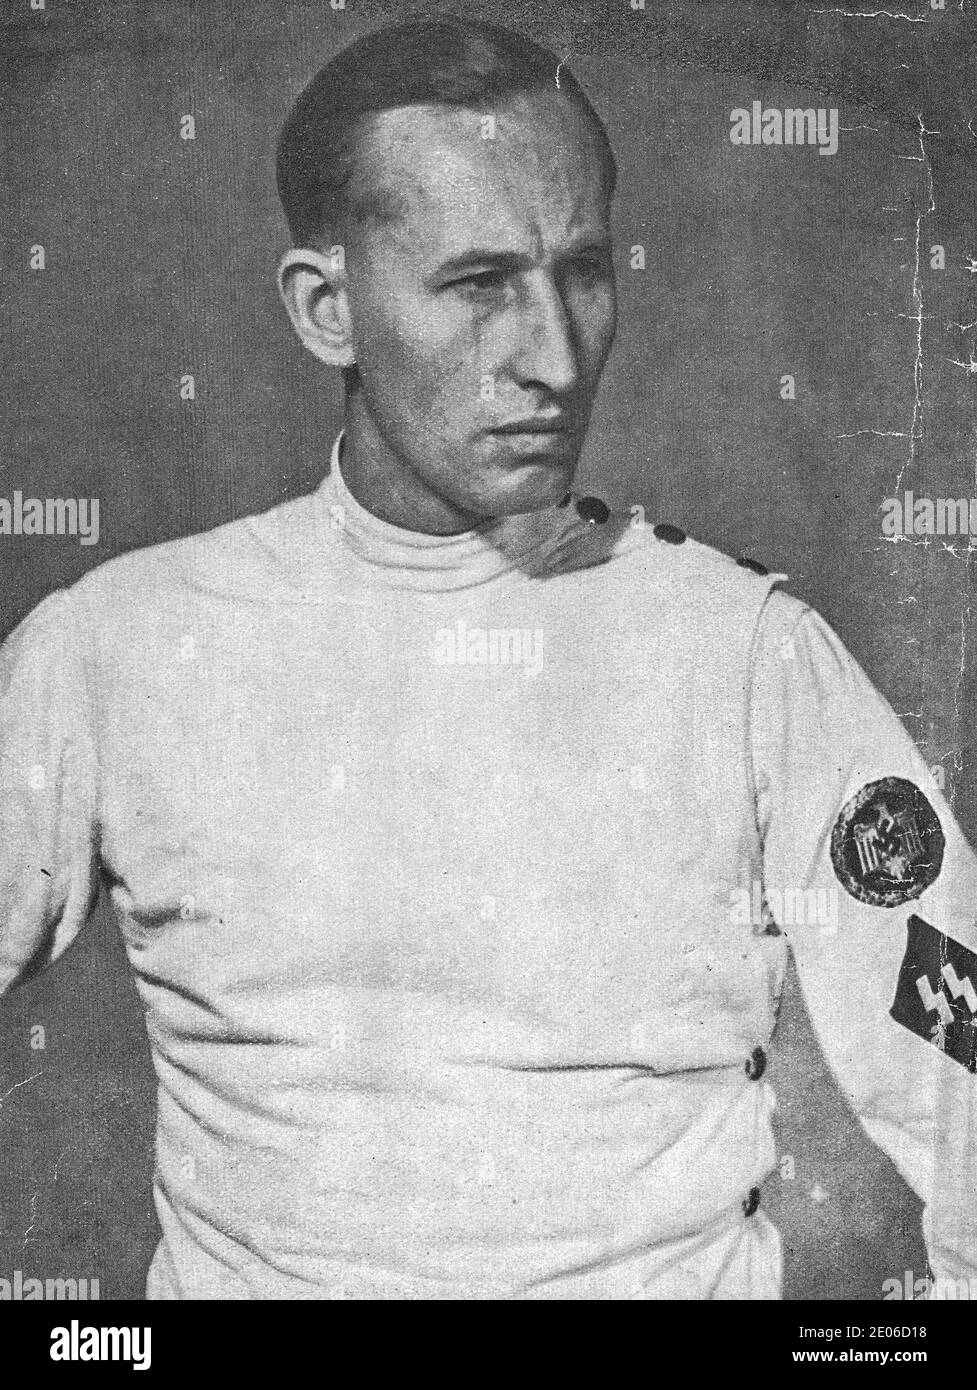 GERMANY - 1931: Reinhard Heydrich as a youth, he engaged his younger brother, Heinz, in mock fencing duels. He excelled in his schoolwork. A talented Stock Photo